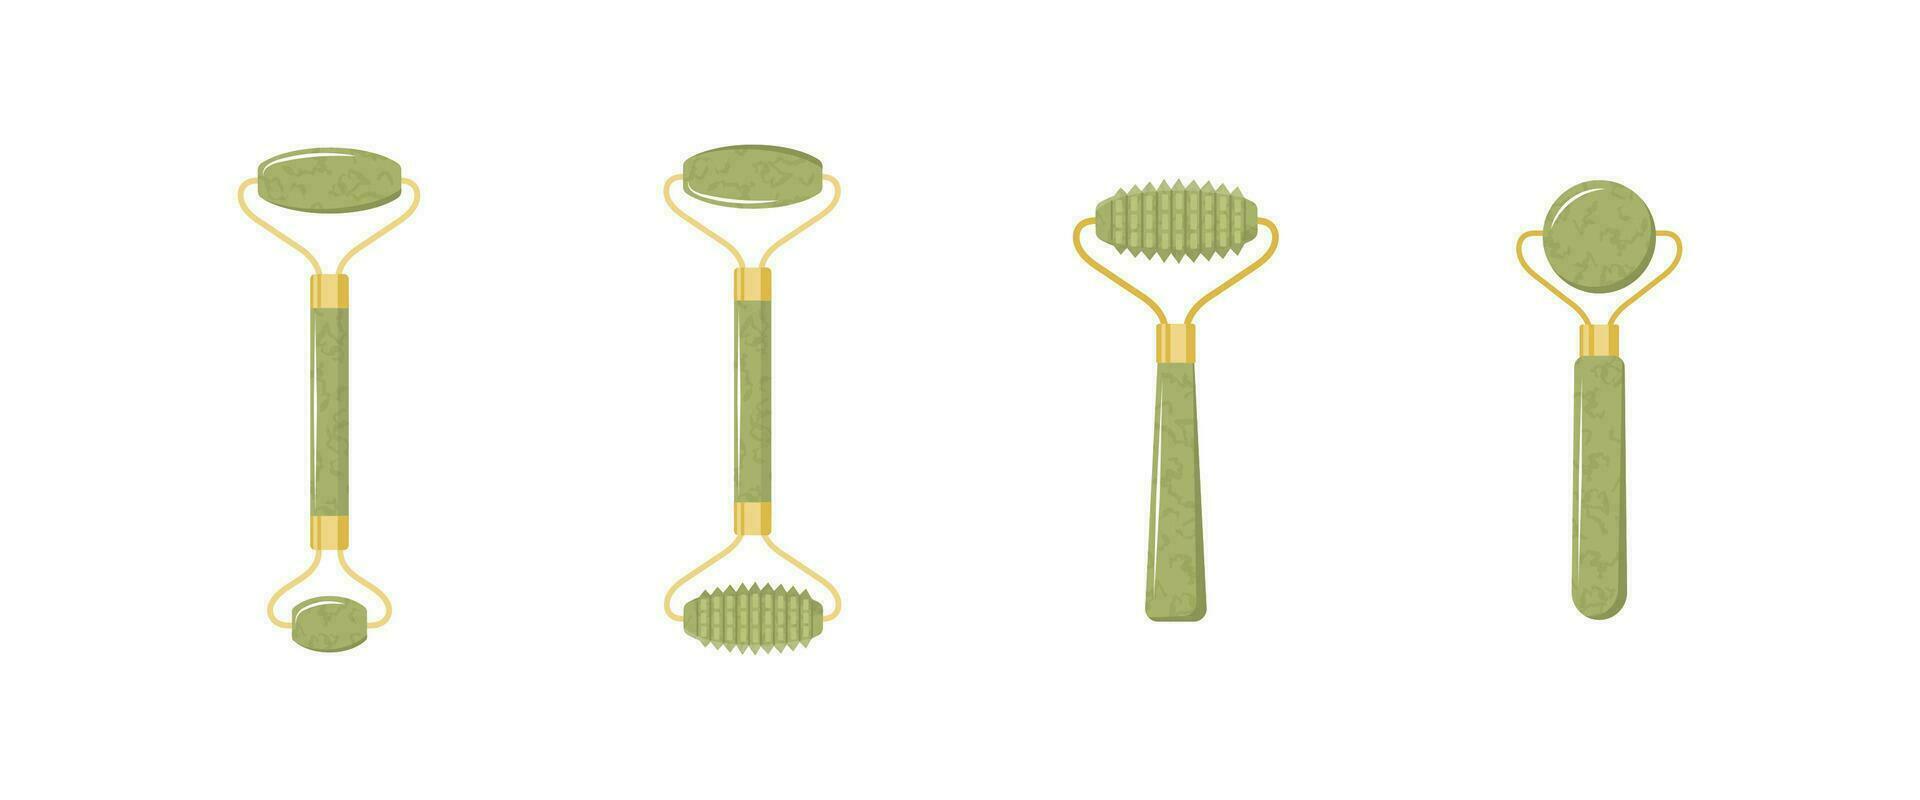 Jade facial roller. Chinese gua sha massage. Collection of different shape natural green nephrite stones. Skin care and morning routine. Vector illustration in flat cartoon style